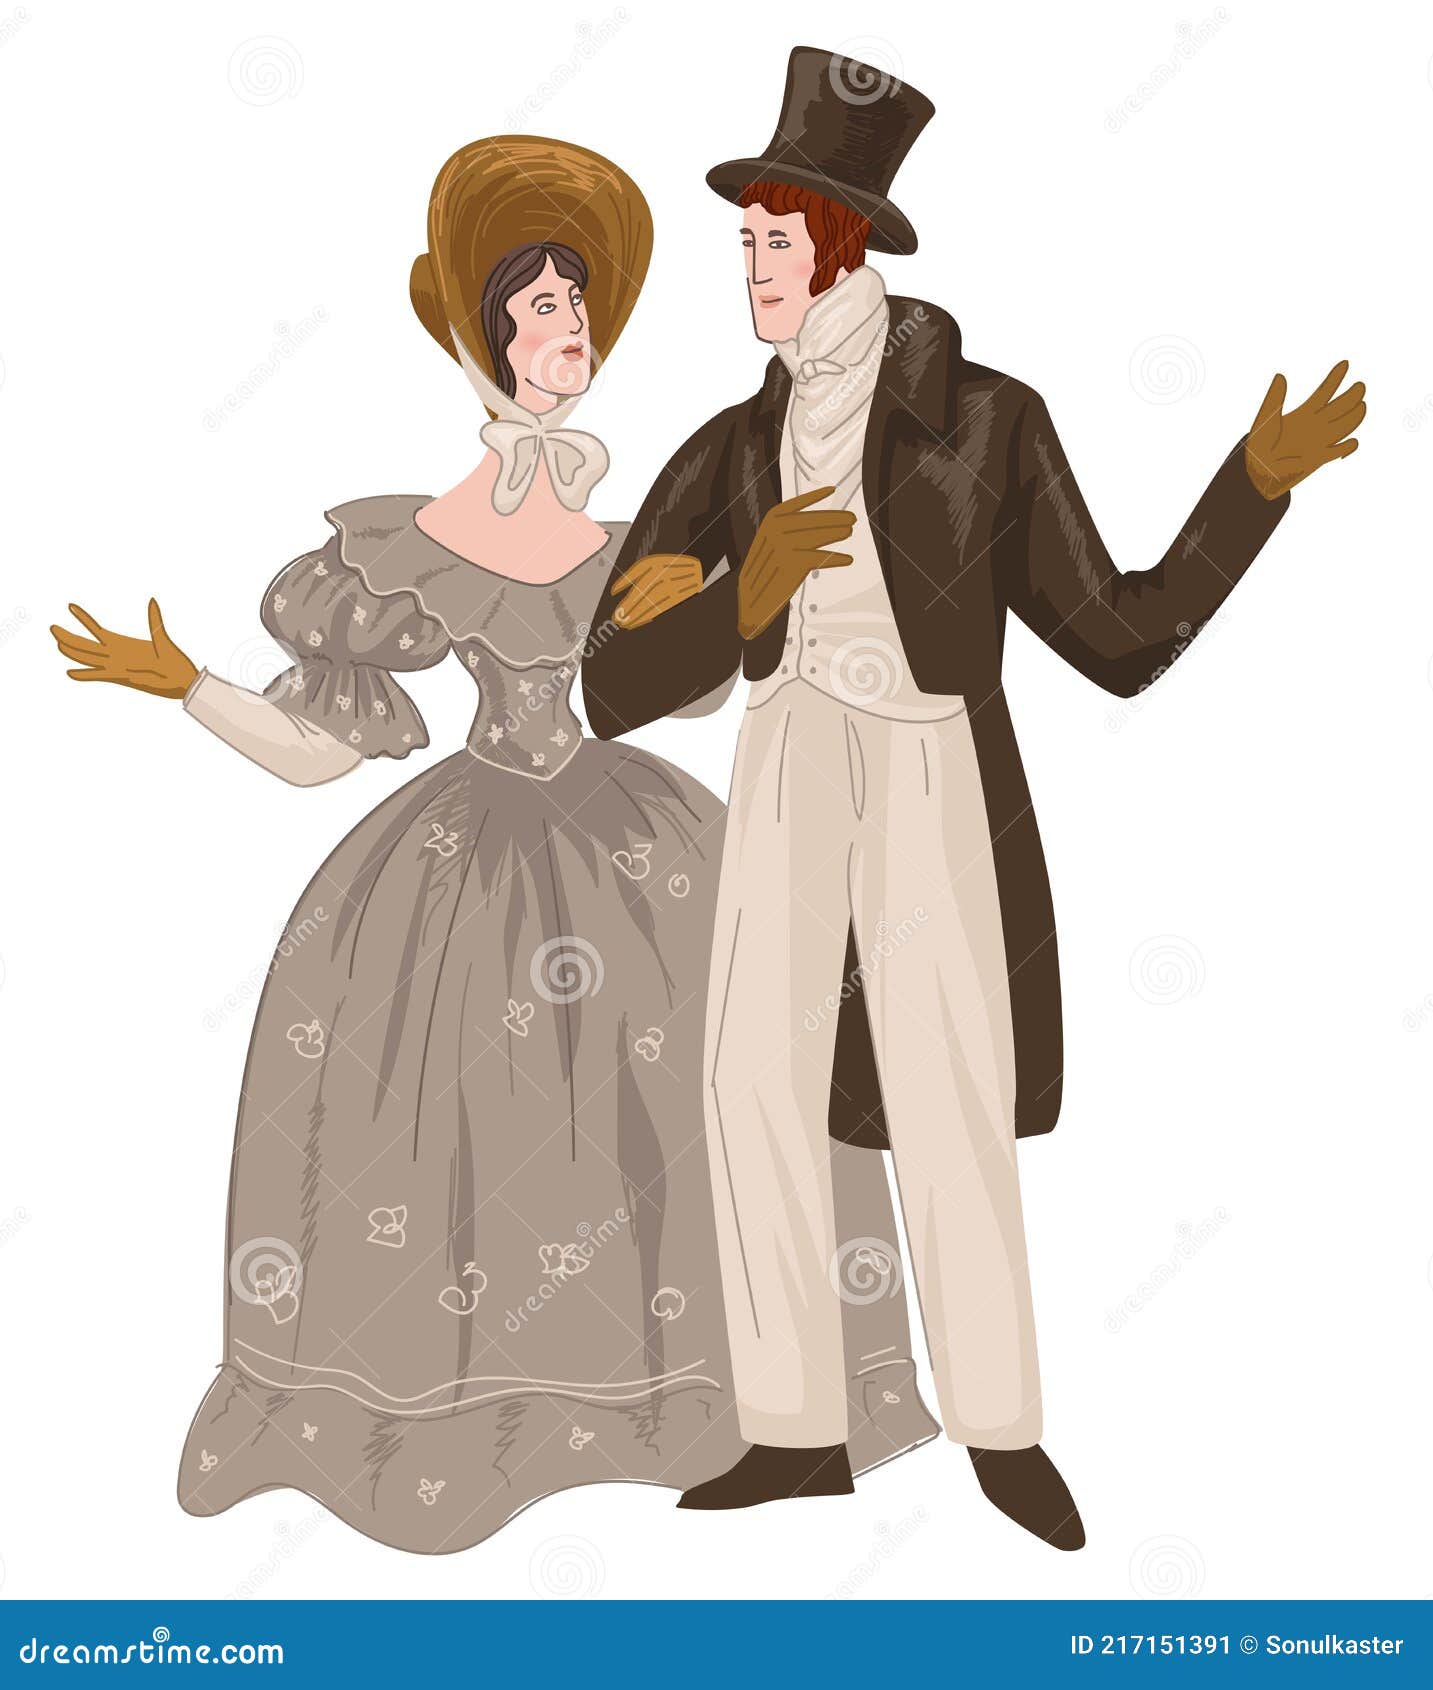 couple of romanticism epoch, vintage man and woman